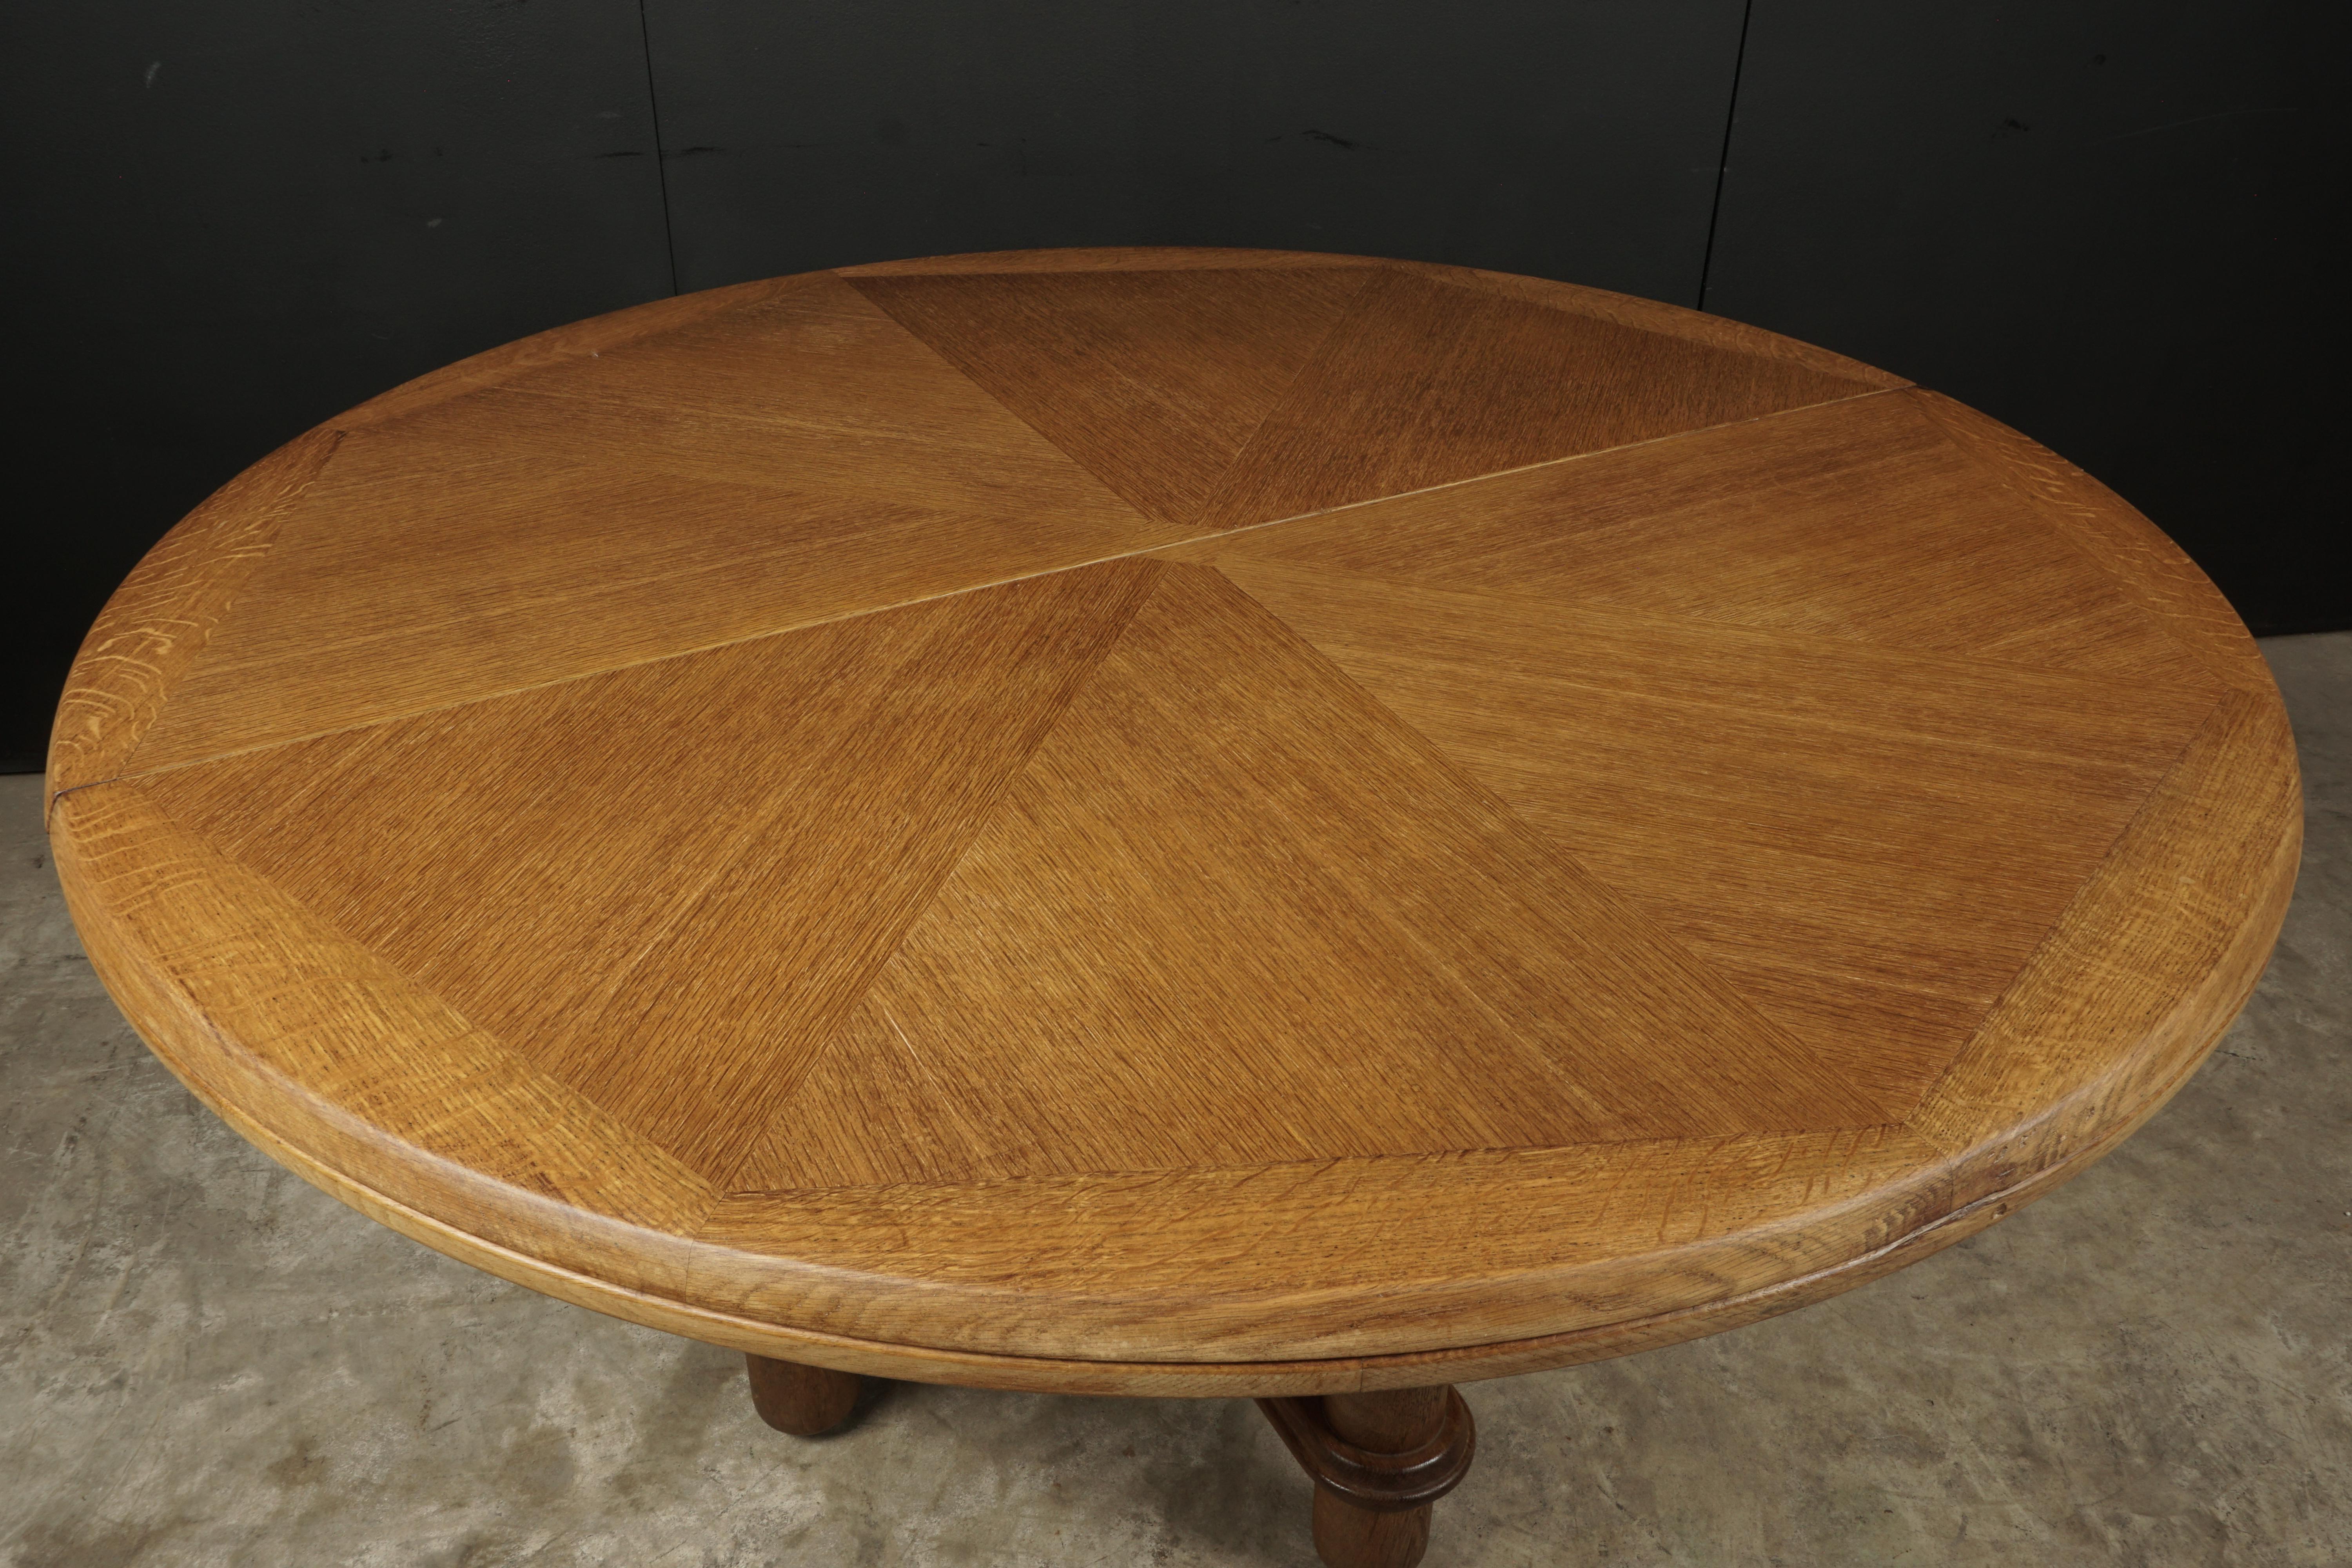 Rare circular oak dining table by Guillerme et Chambron, France, 1960s.
Fantastic model with solid oak construction. Great condition.